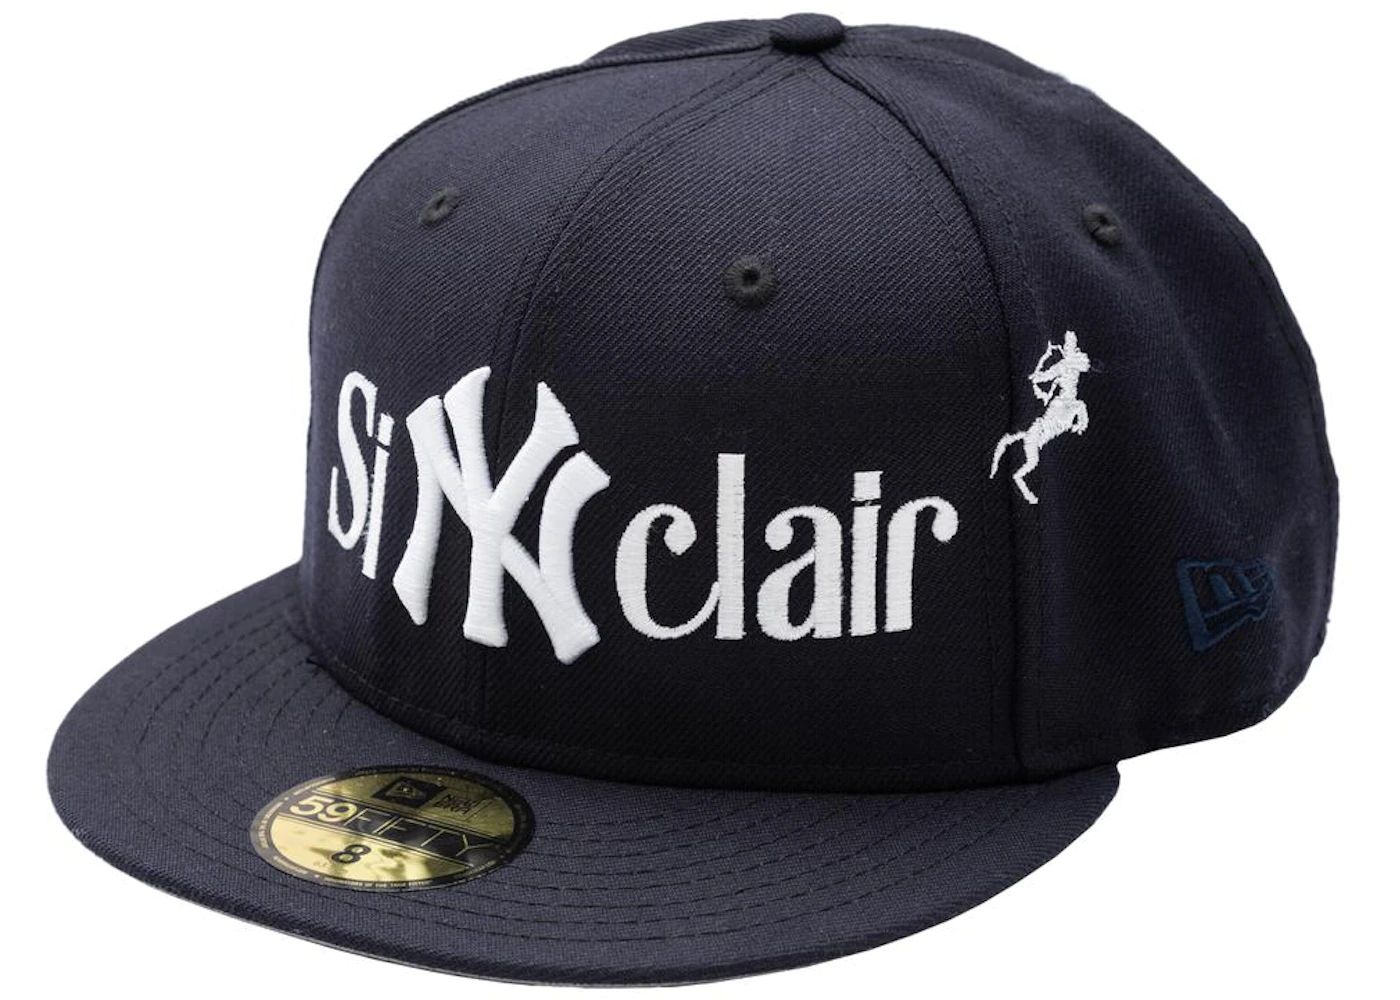 Sinclair Global New Era Bring NY Back 59Fifty Fitted HatNavy | StockX